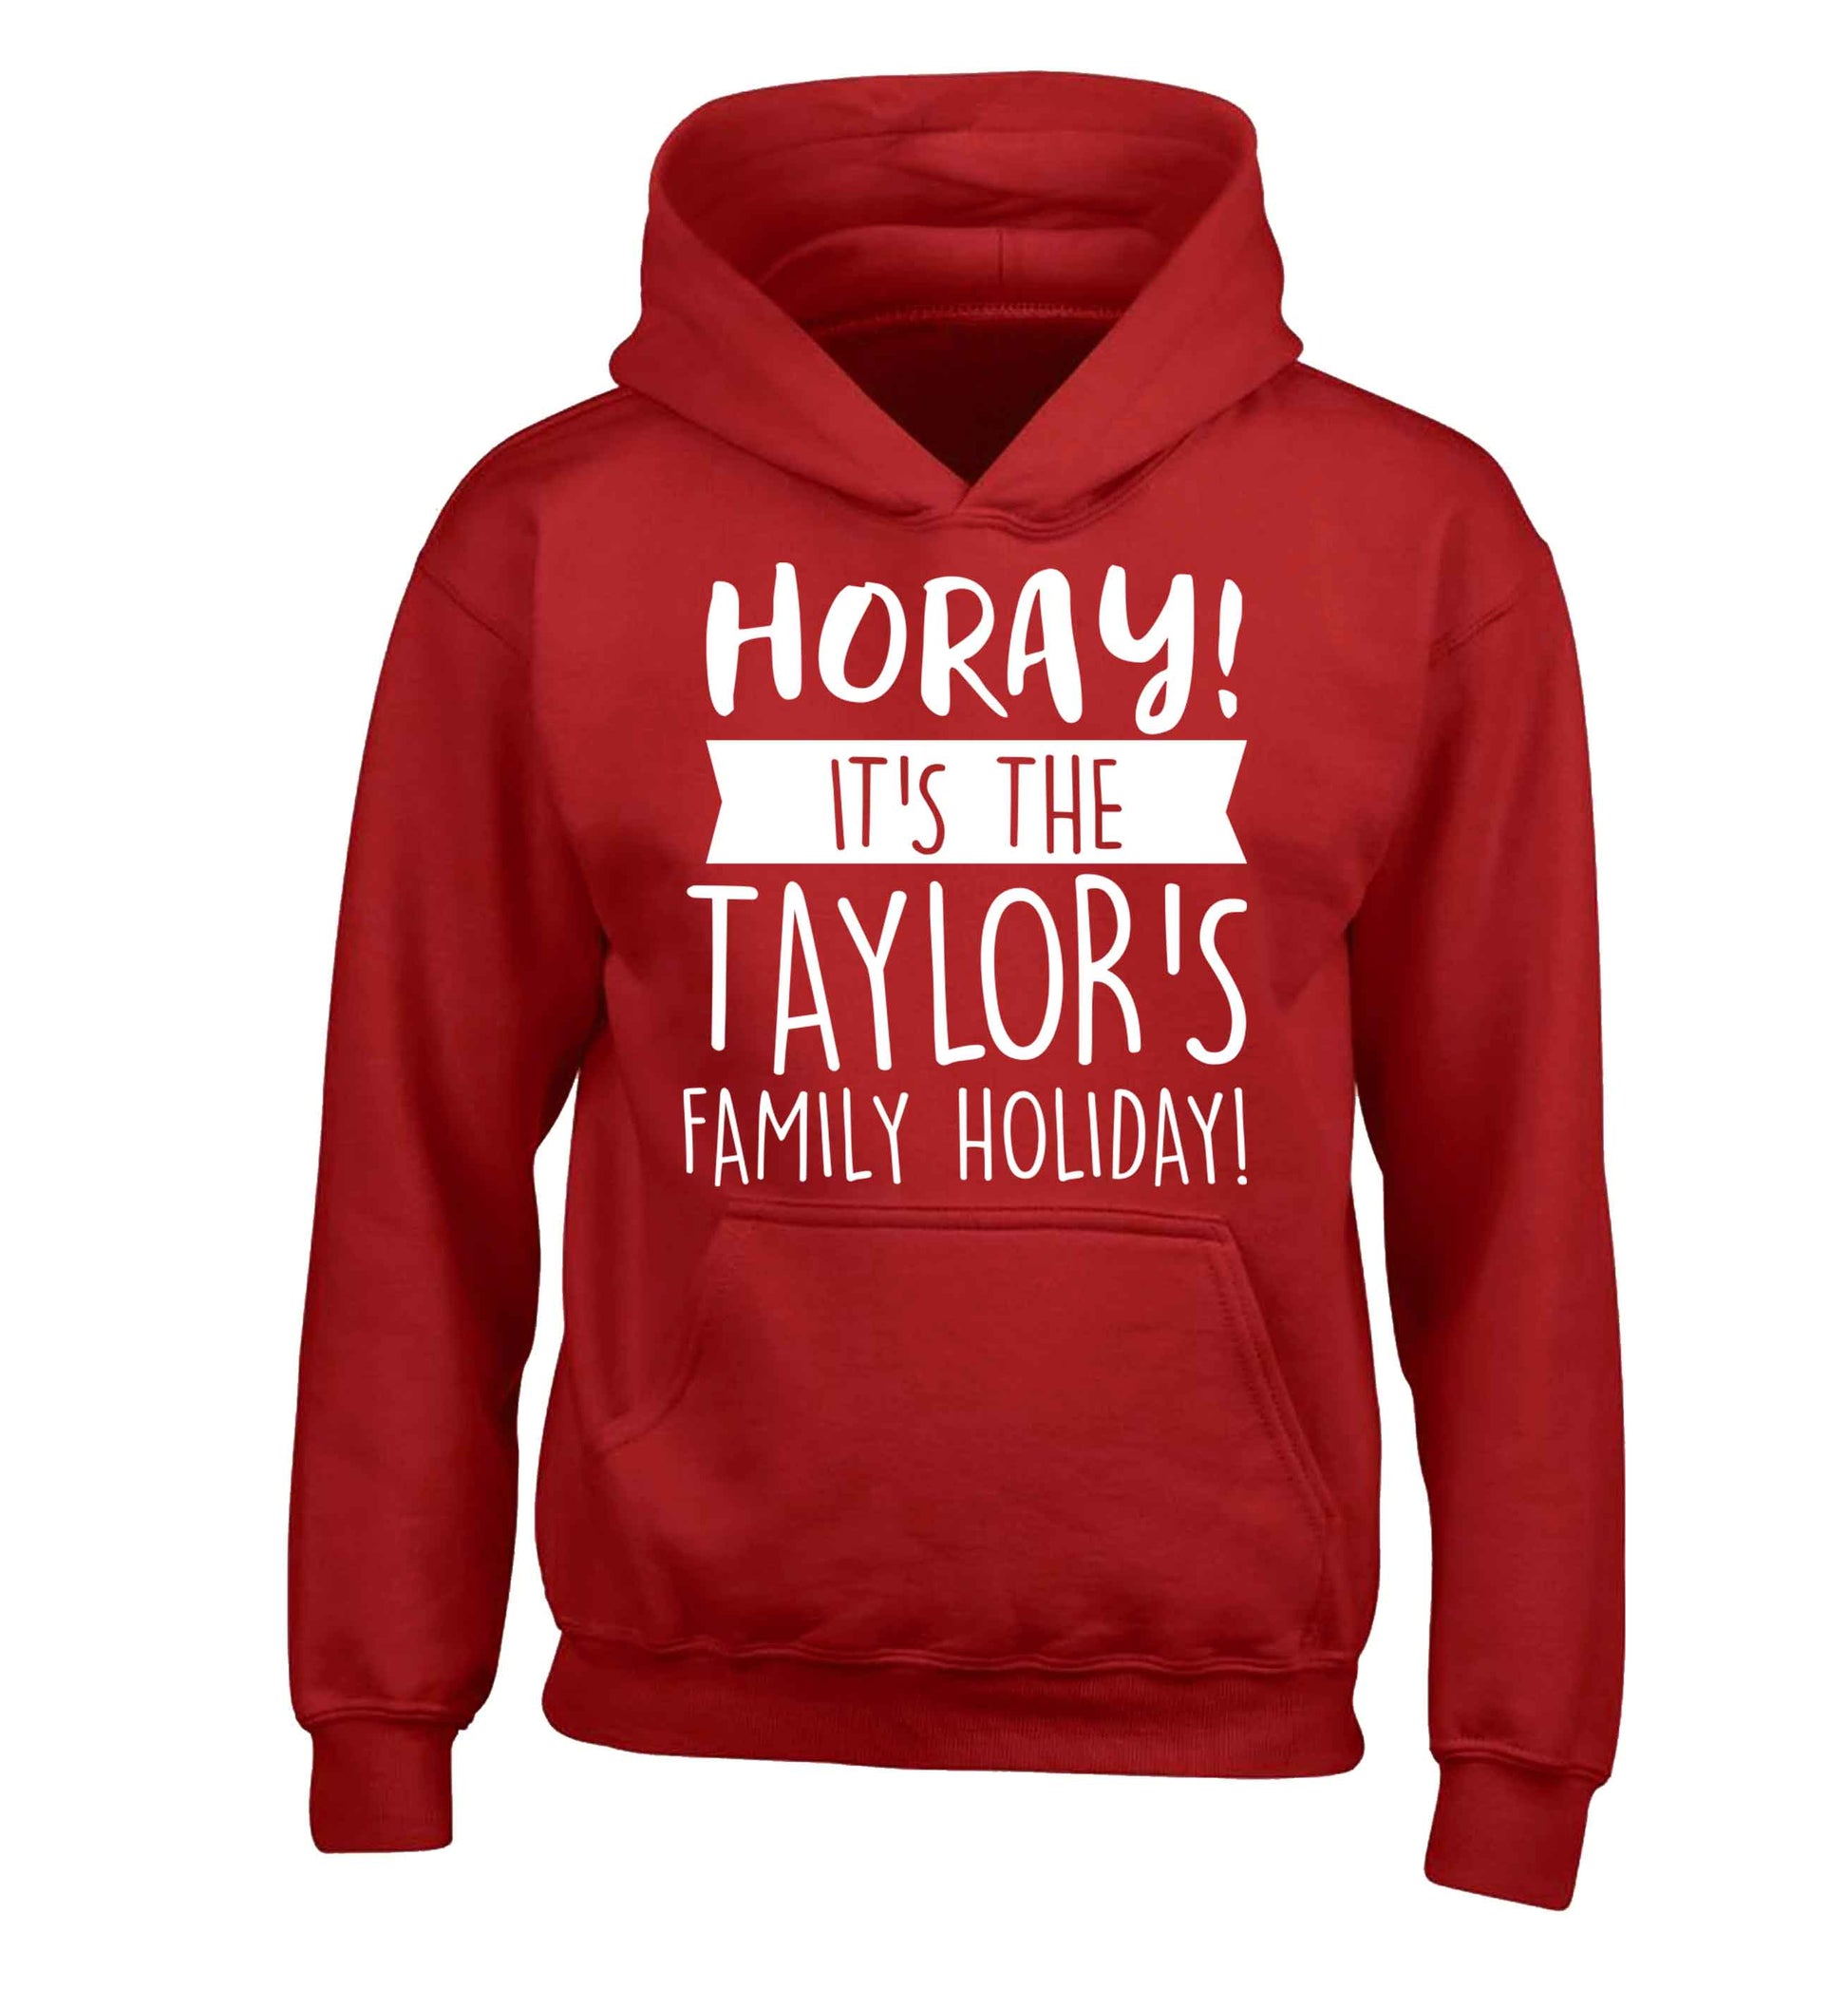 Horay it's the Taylor's family holiday! personalised item children's red hoodie 12-13 Years